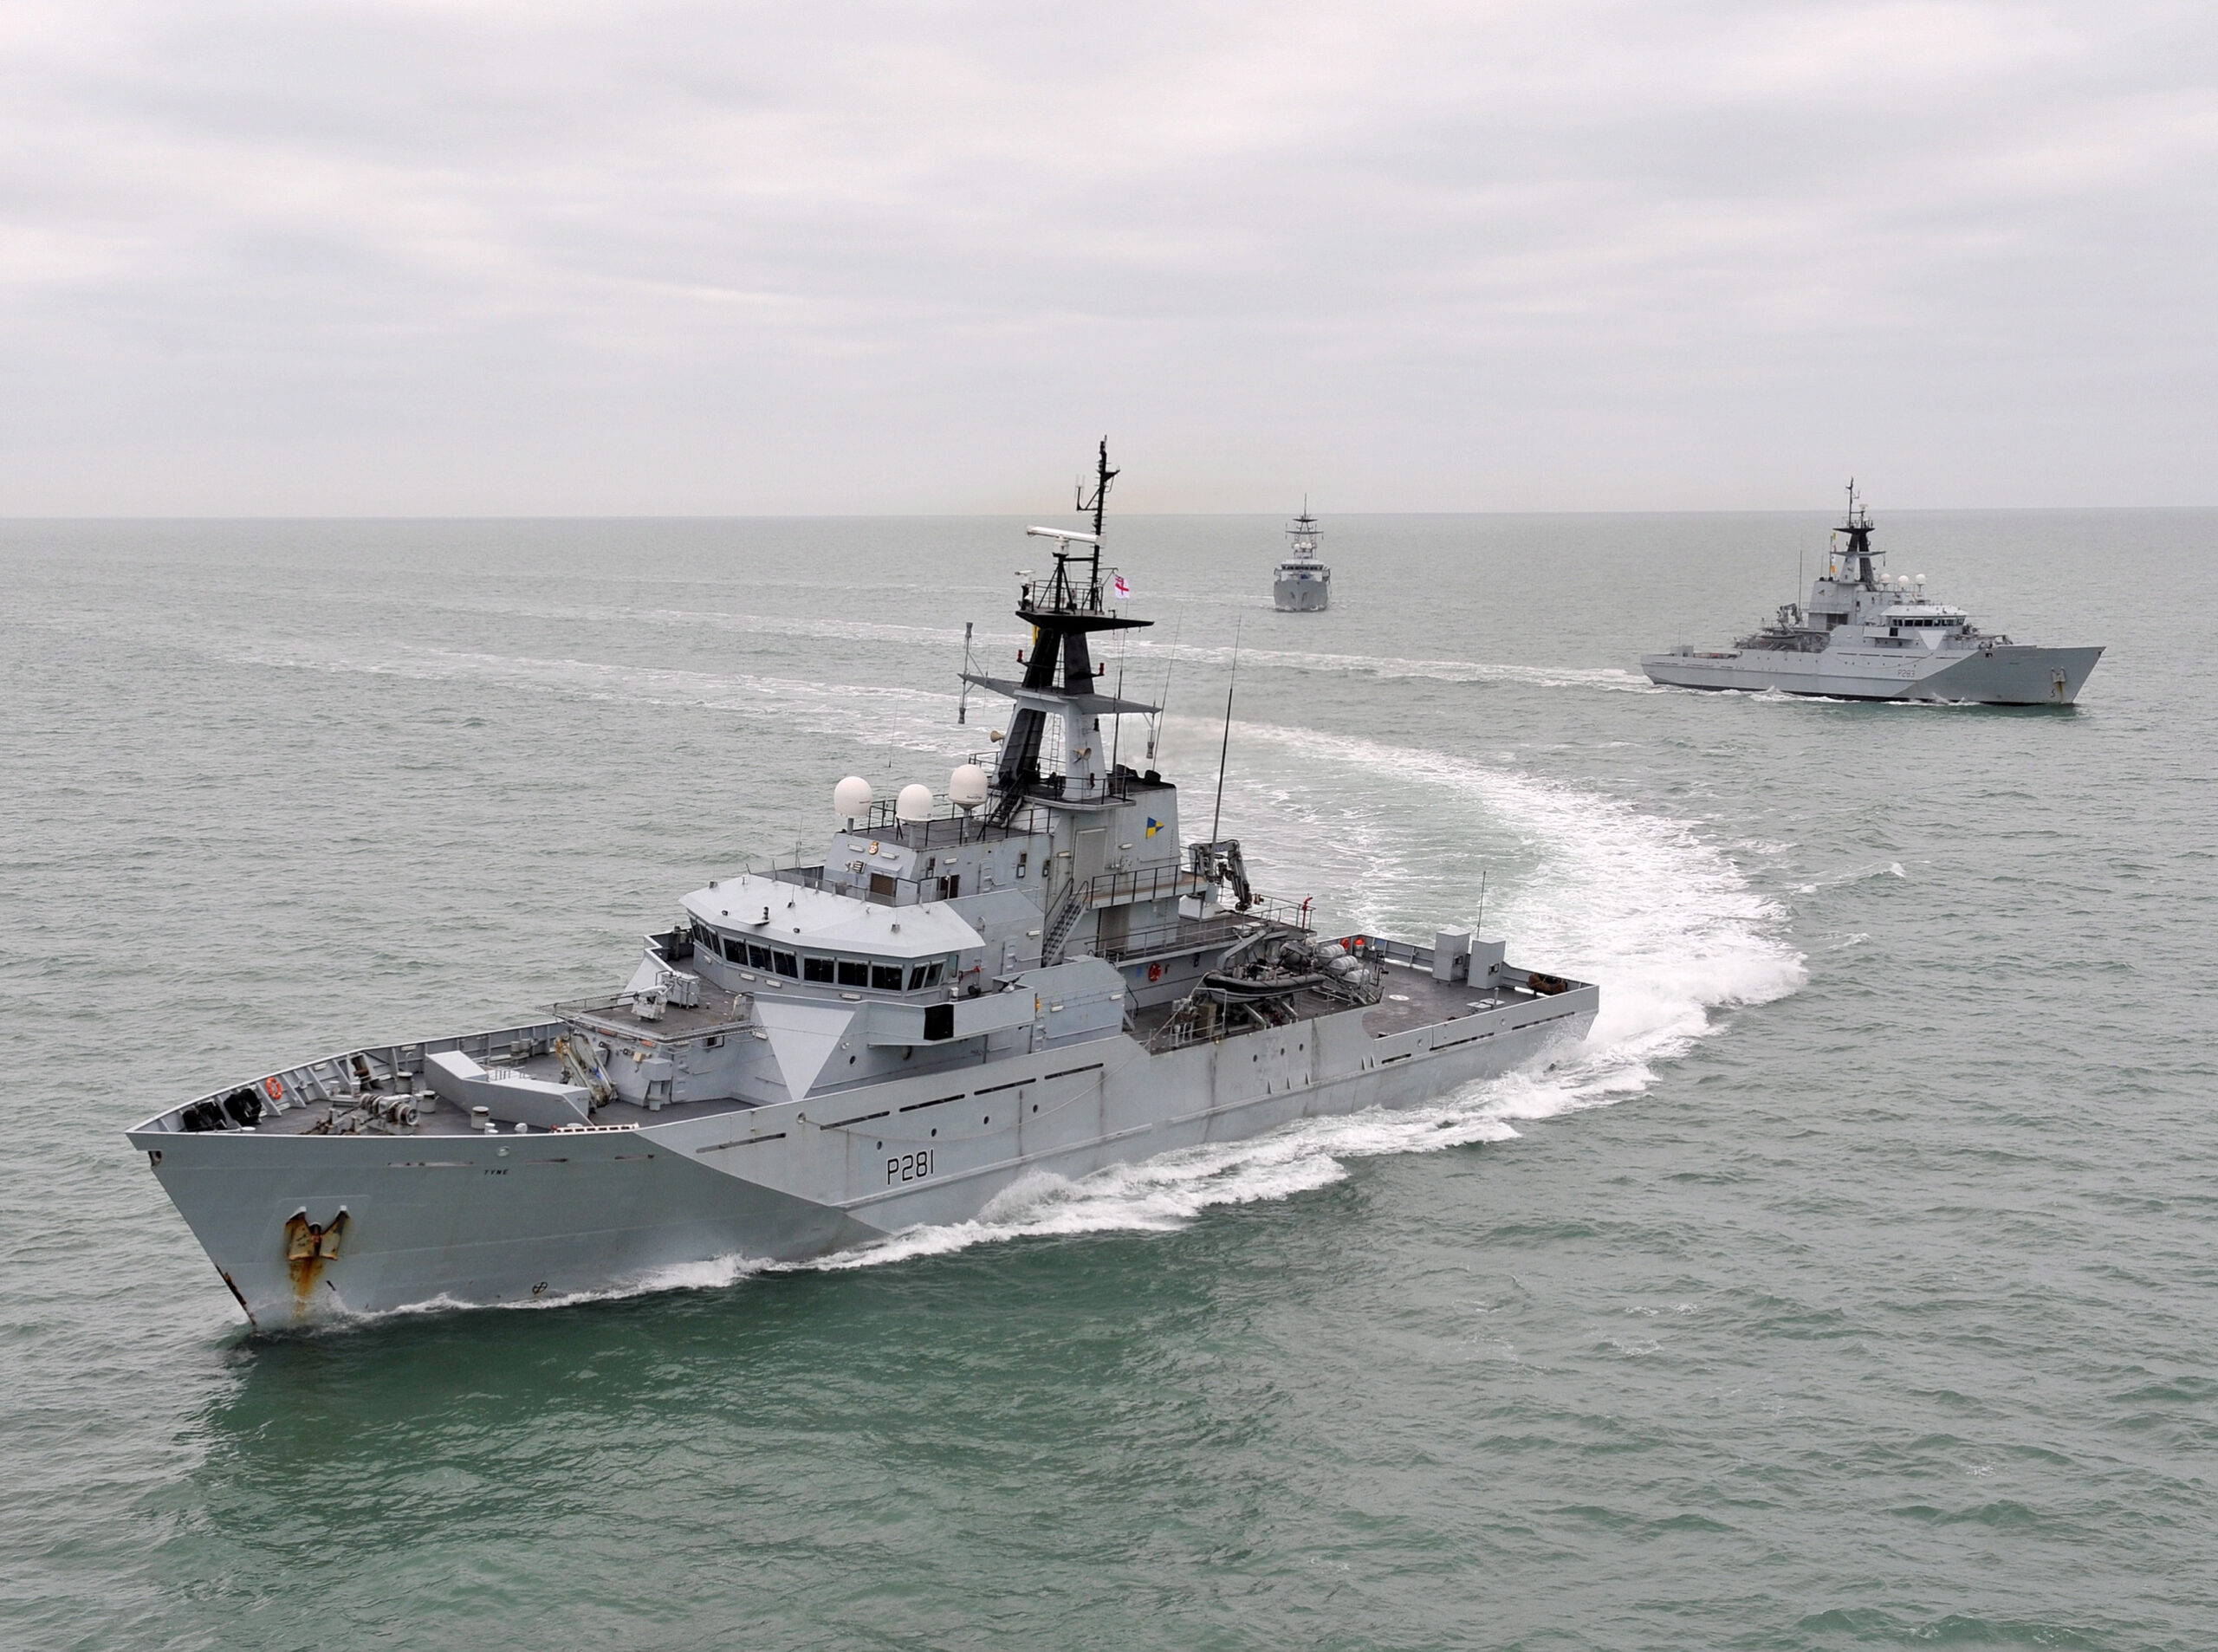 Library Image: The three River-class patrol vessels of the Fishery Protection Squadron, HMS Mersey, HMS Severn and HMS Tyne (foreground) exercising off the coast of Cornwall. FIRST STEEL CUT ON £348 MILLION ROYAL NAVY WARSHIP CONTRACT Steel was cut today for the first of three new Royal Navy offshore patrol vessels (OPVs) at a ceremony in Glasgow attended by the Secretary of State for Scotland and the Ministry of Defences (MoD) Chief of Defence Materiel. The vessels, which will be used by the Royal Navy to undertake various tasks in support of UK interests both at home and abroad, will be built at BAE Systems shipyards in a contract that has protected more than 800 Scottish jobs.